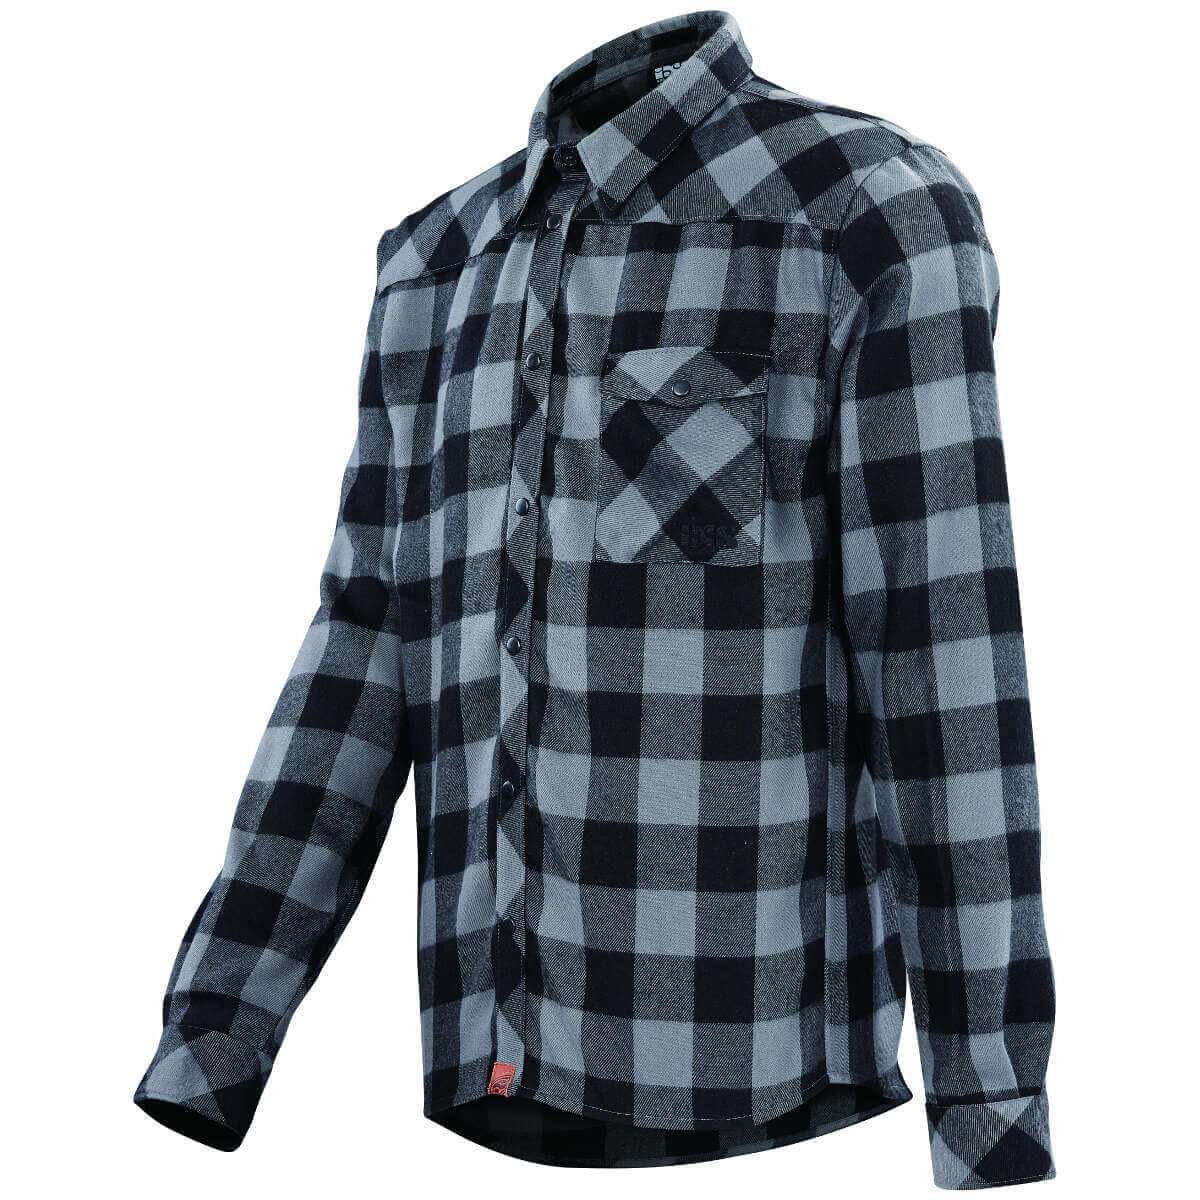 IXS Flannel Shirt Long Sleeve Escapee Black/Anthracite